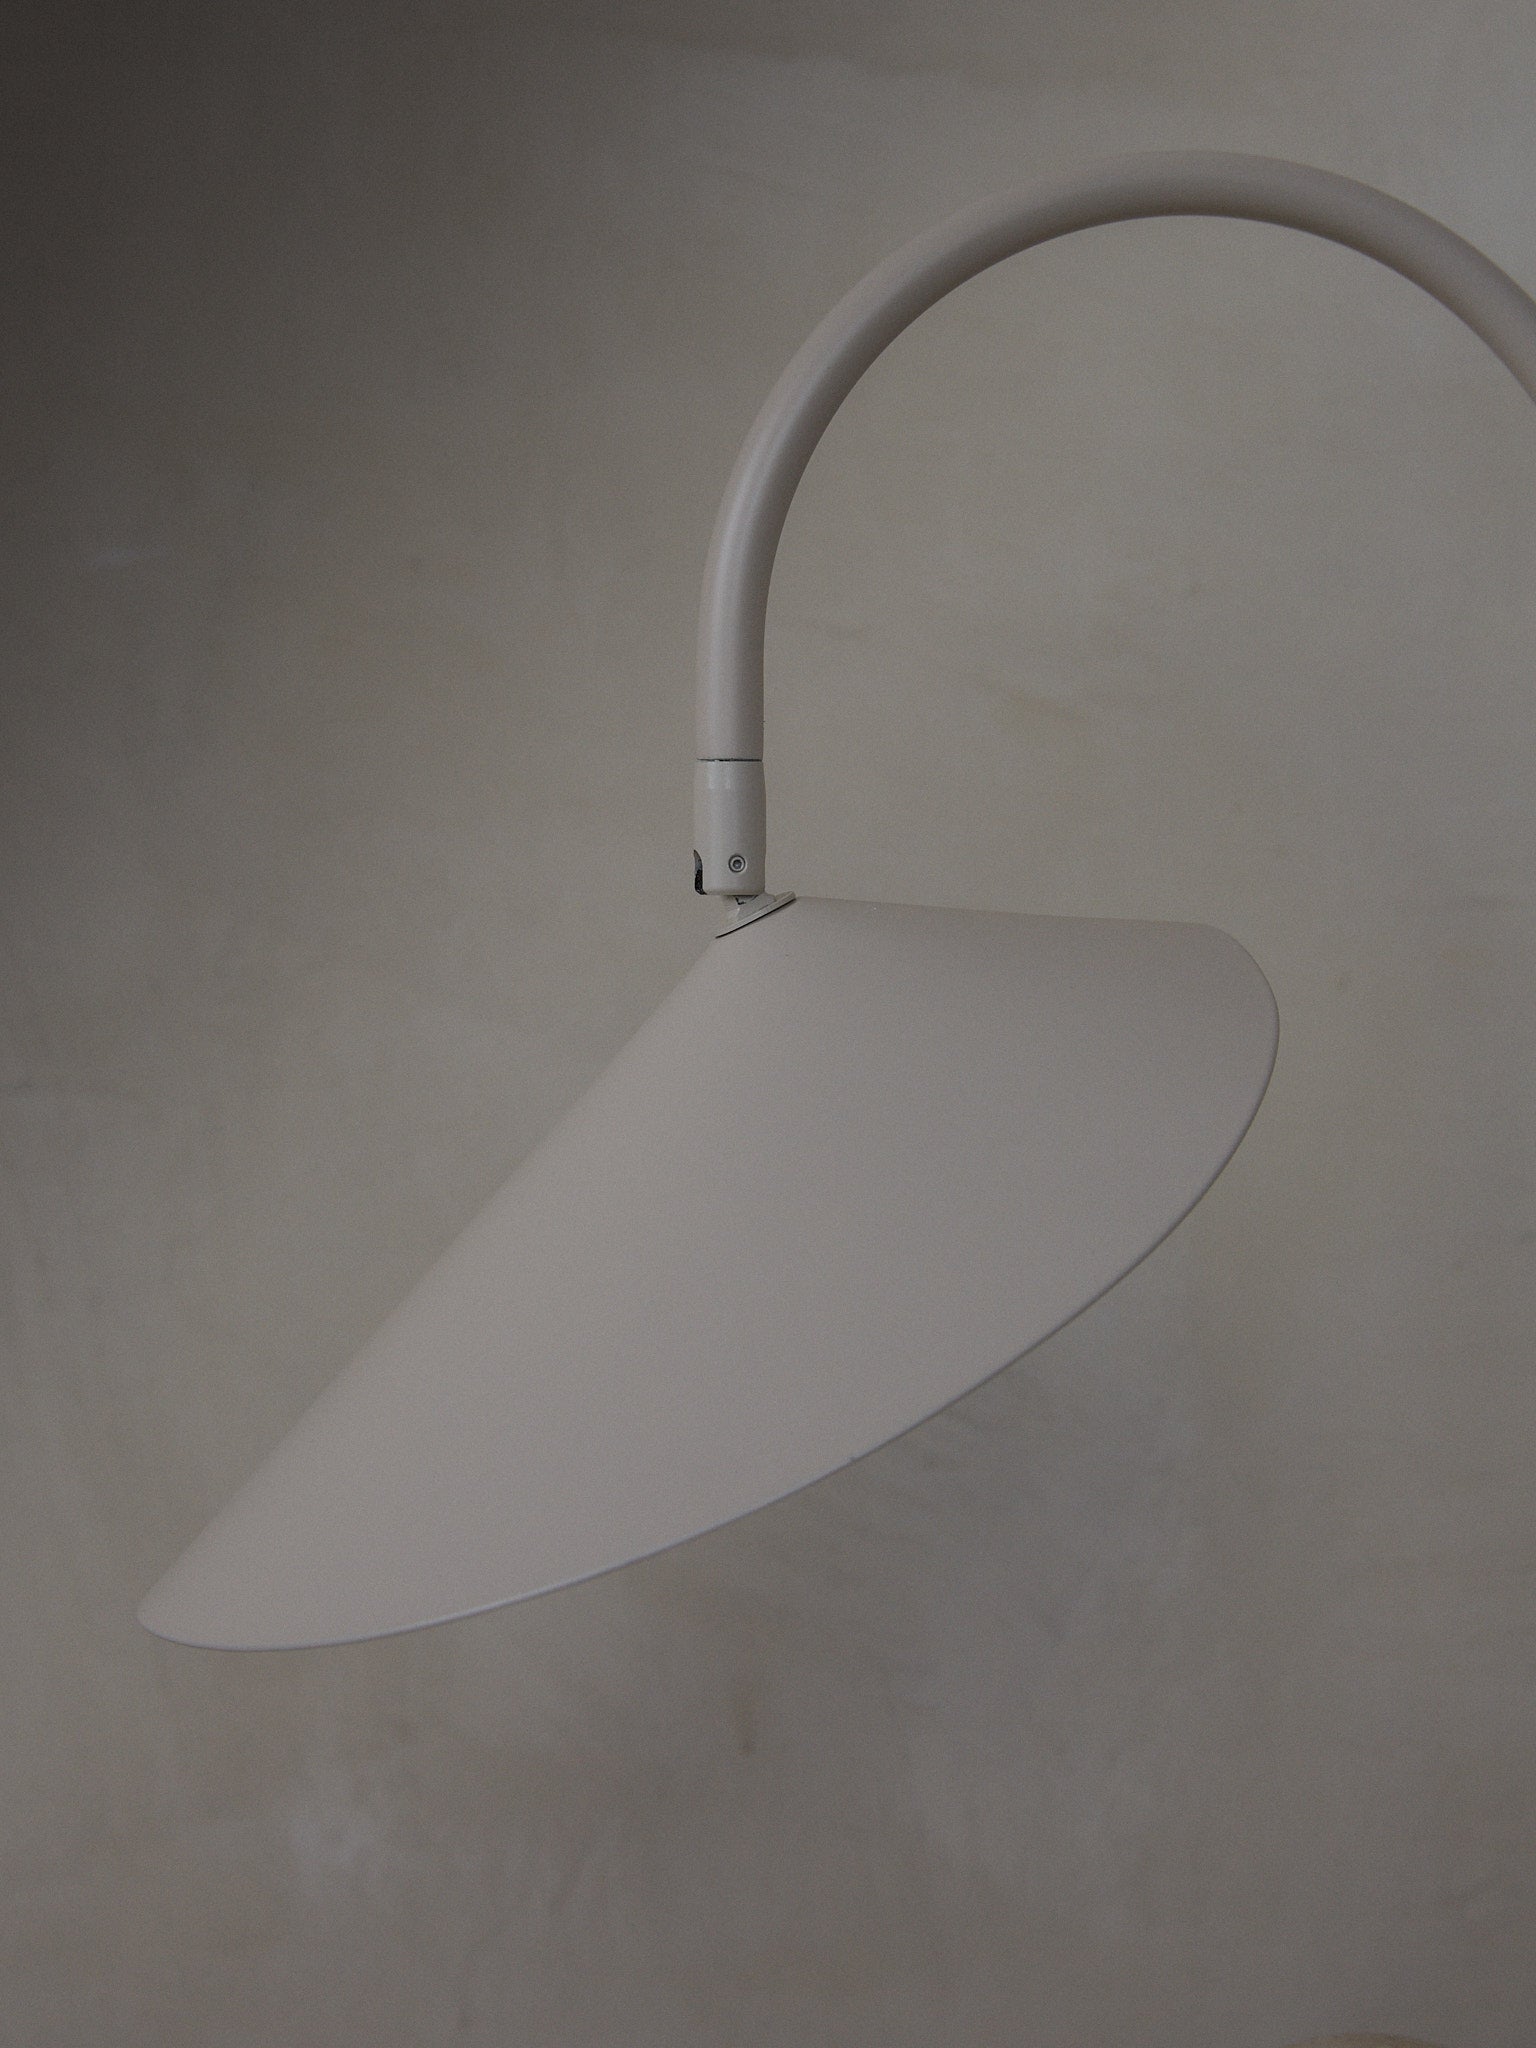 Arum Table Lamp. Statuesque, organically shaped table lamp with a beige travertine base and petal-like shade suspended from a curved metal arch. 